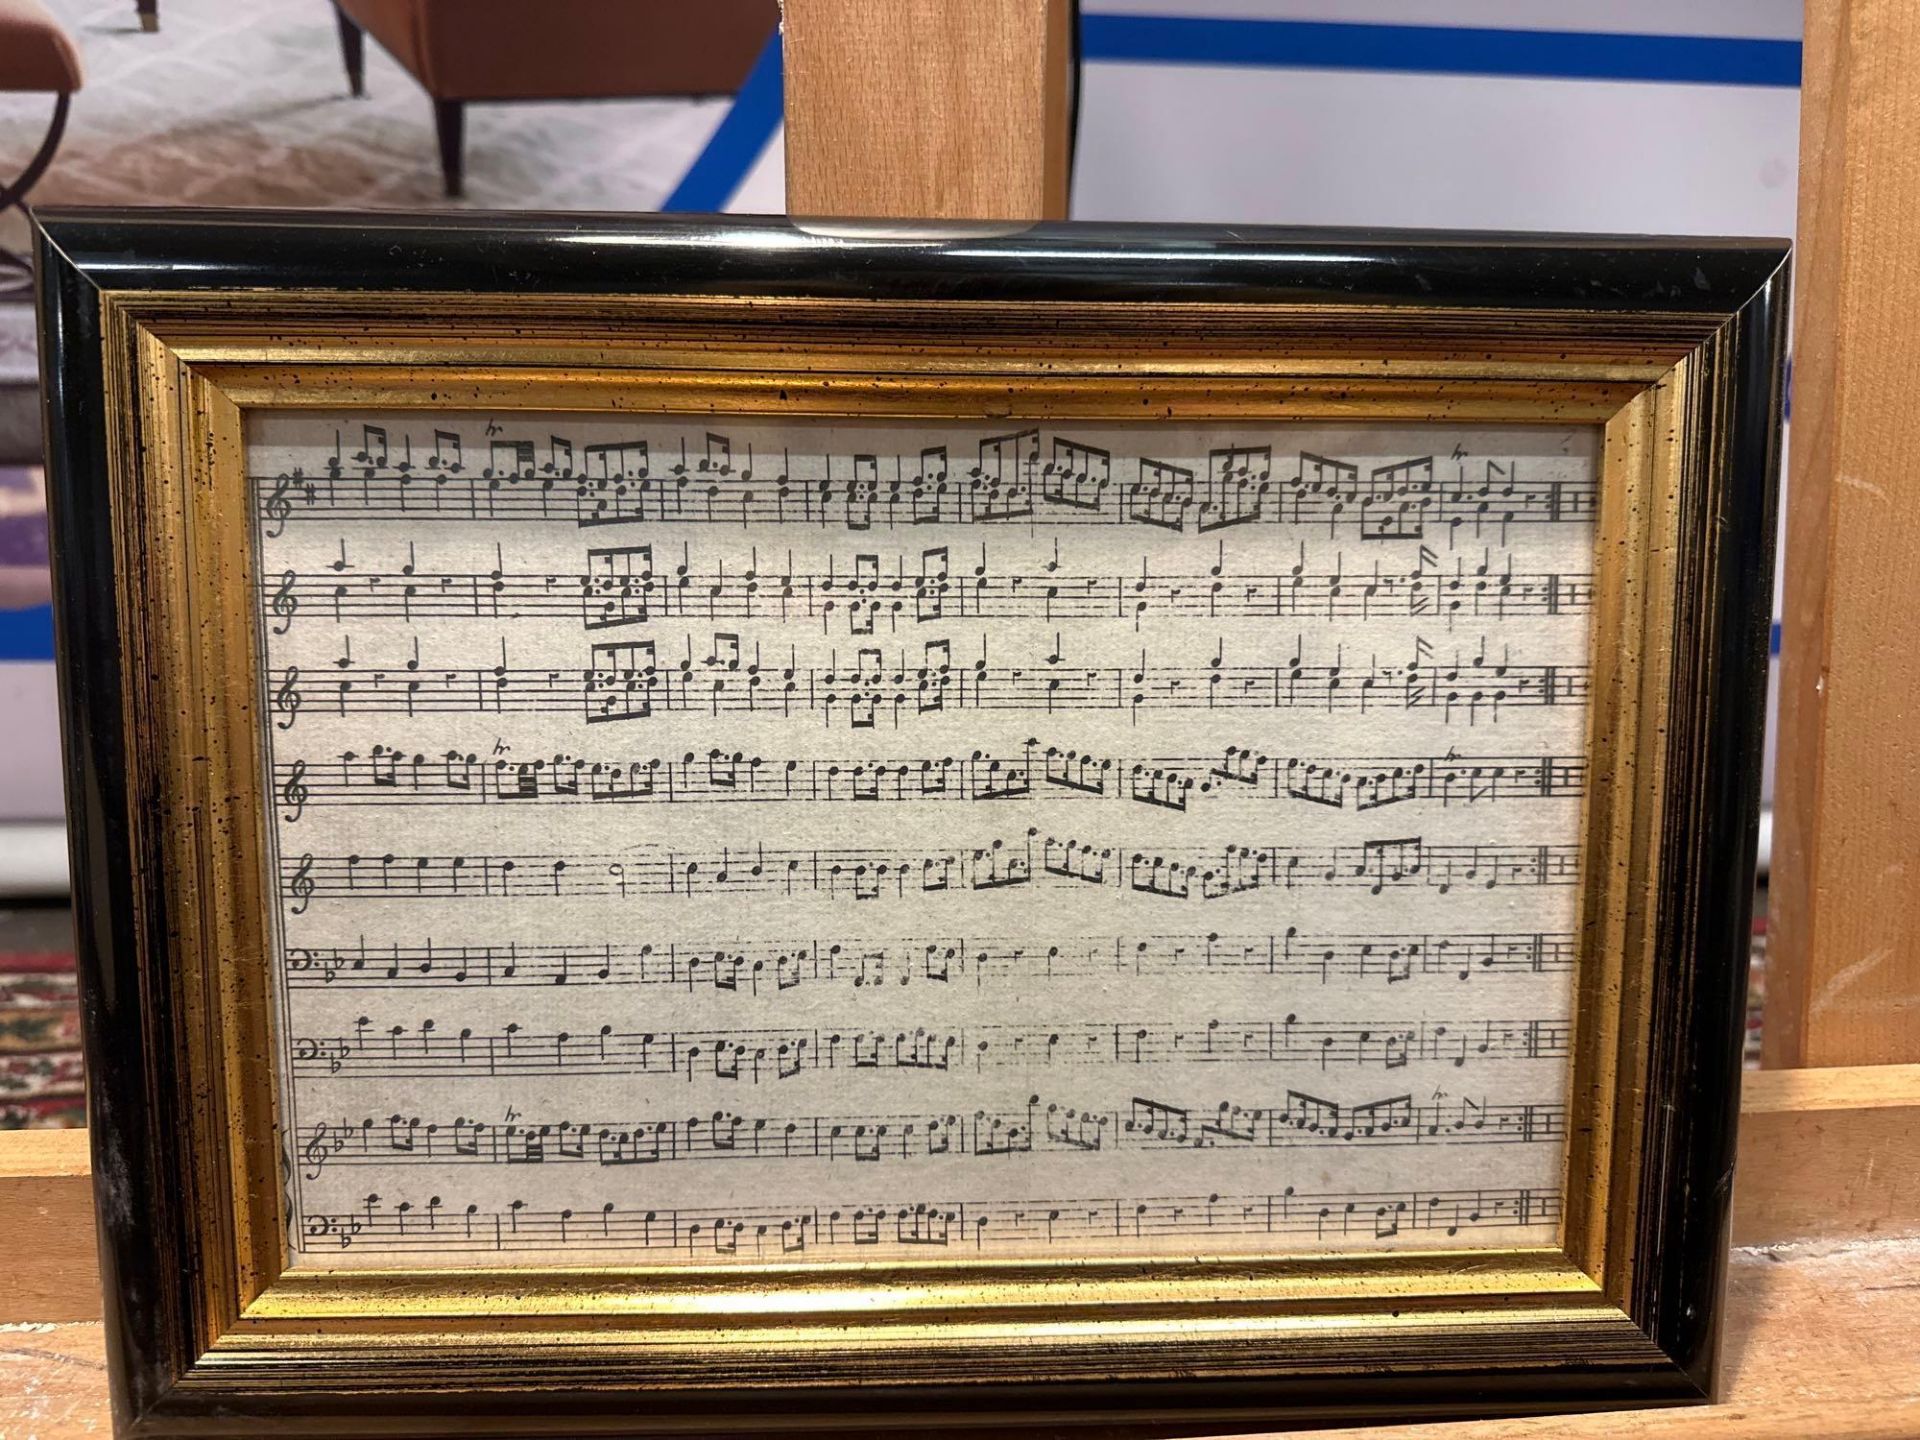 2 x Framed Prints of Music Scores 37 x 27cm (Hotel 16) - Image 3 of 4